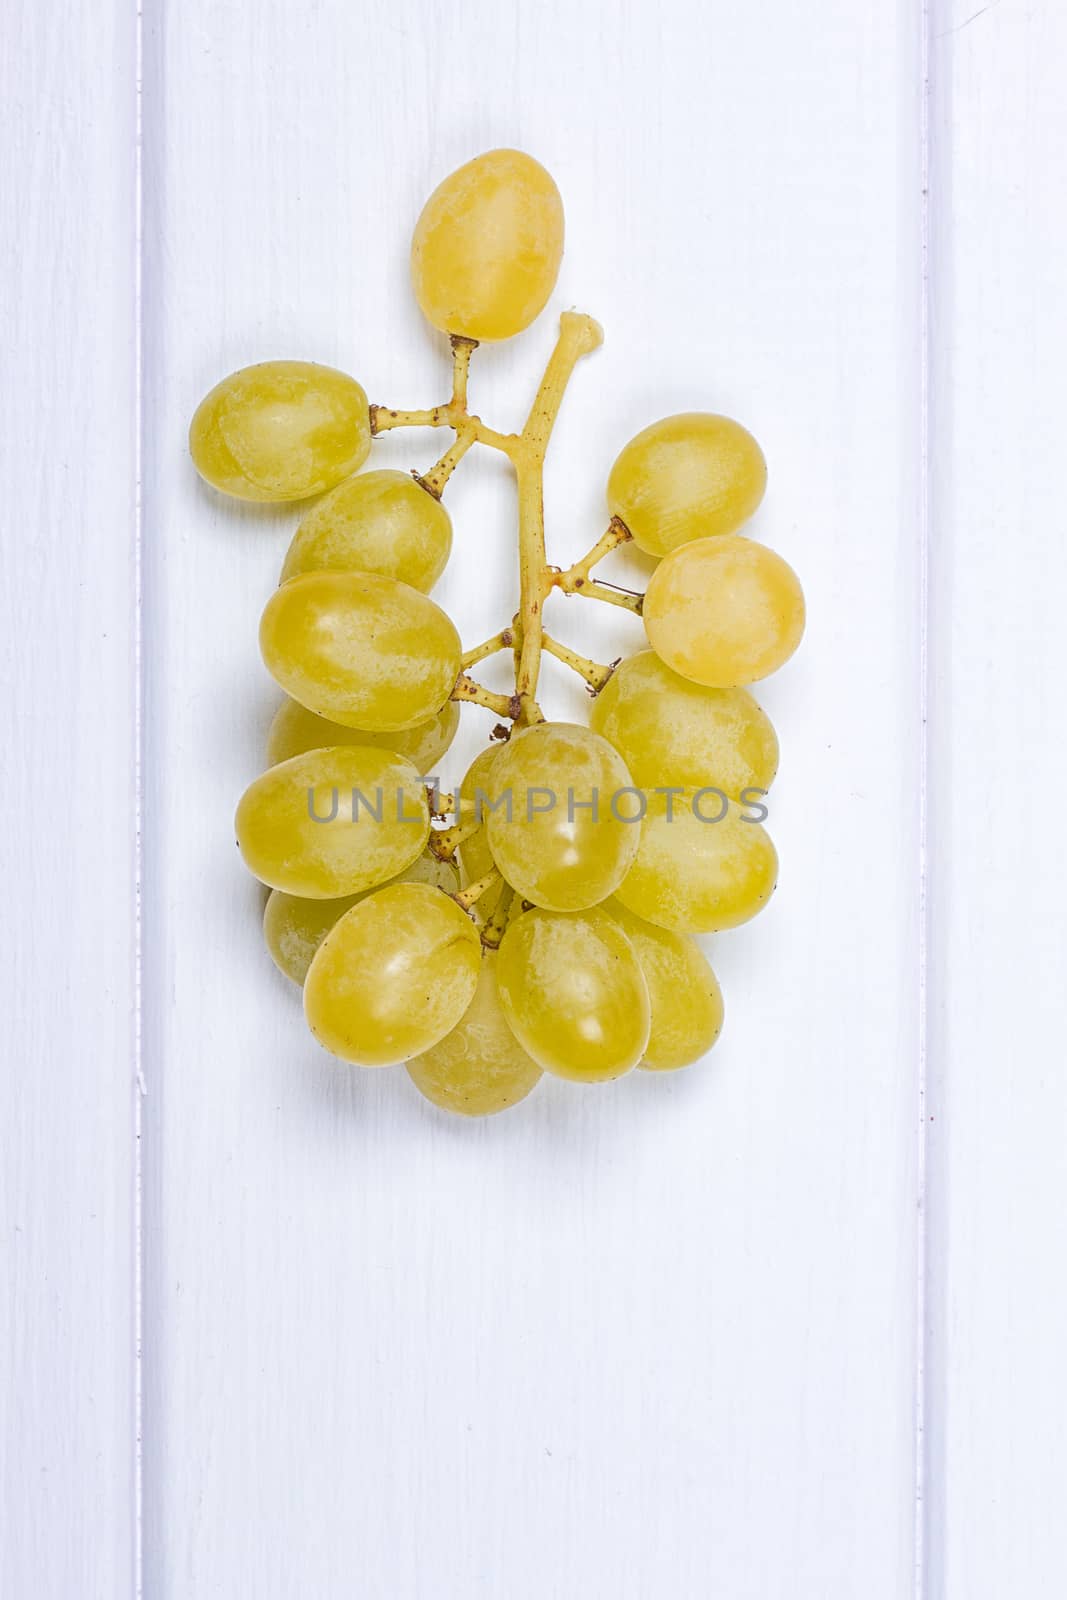 White grapes on white wooden surface. top view. copy-space